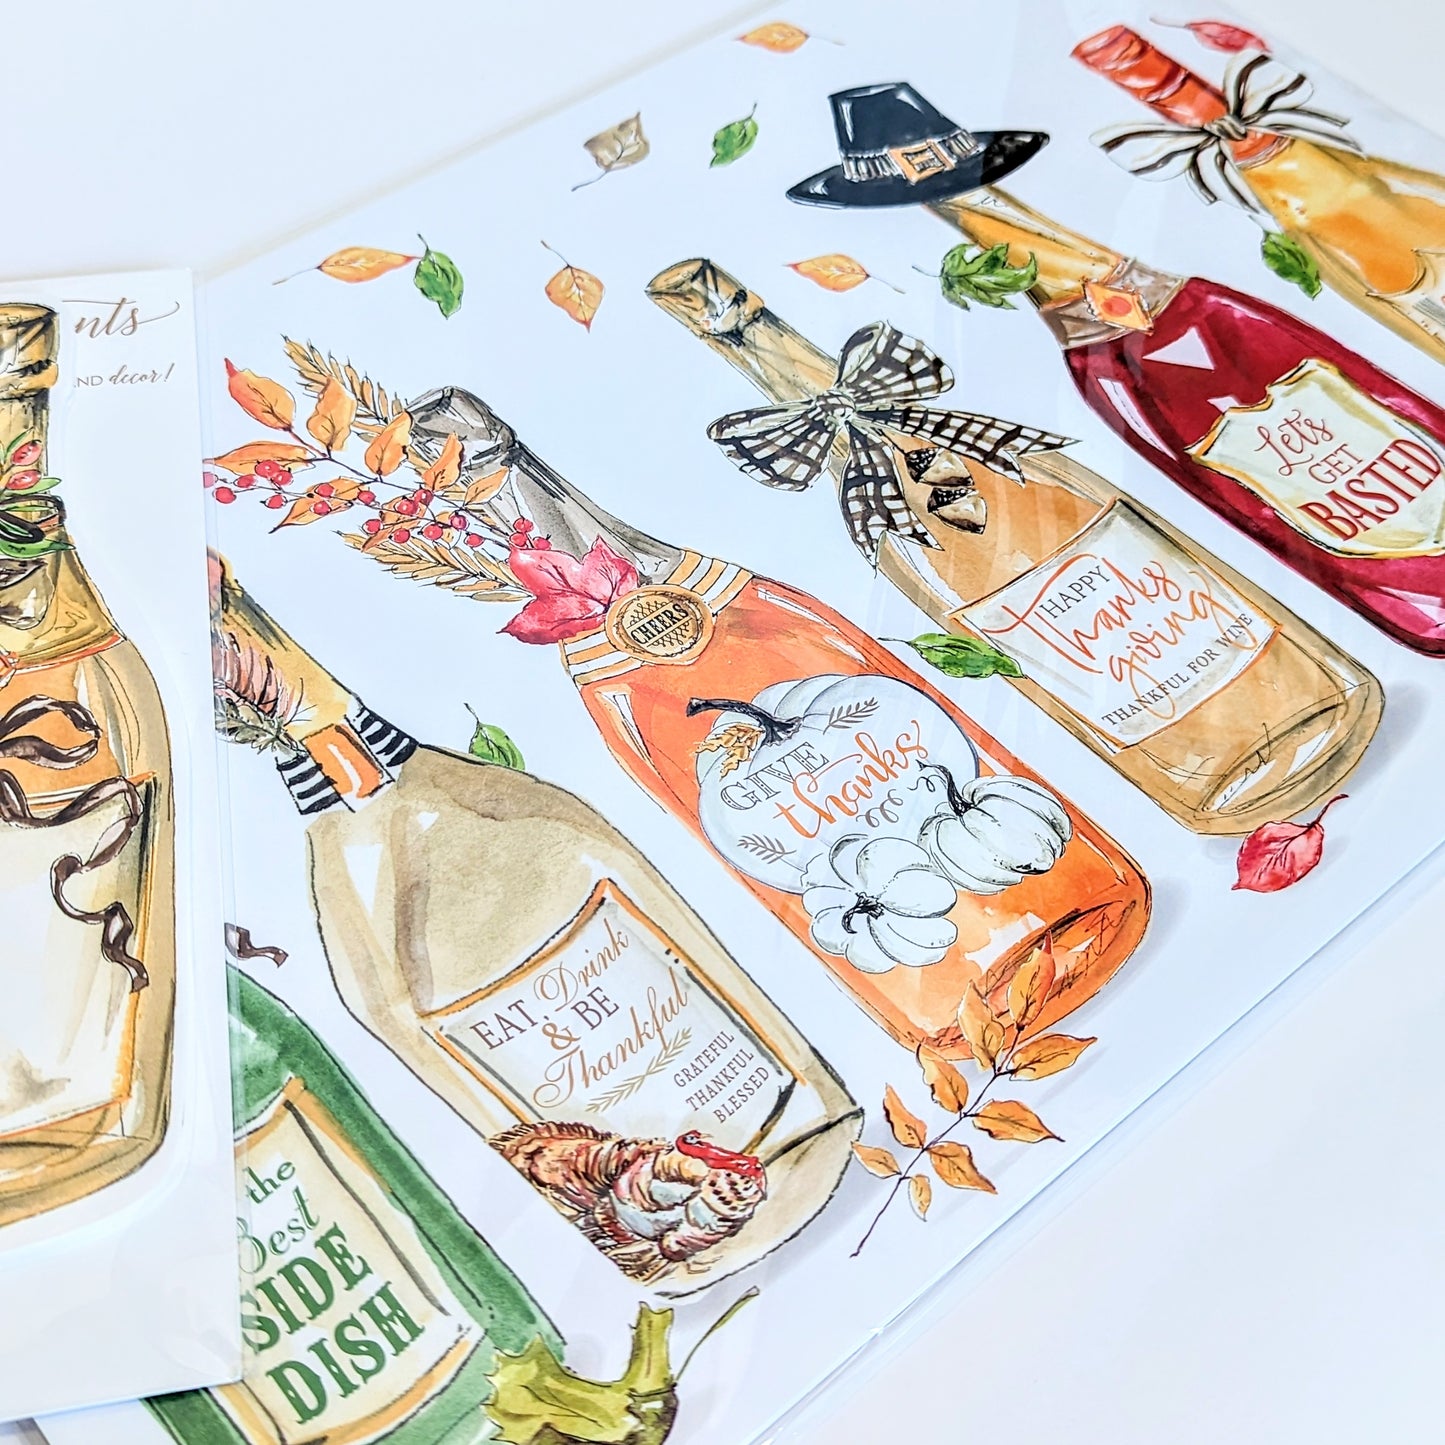 Placemats - Handpainted Thanksgiving Bottles